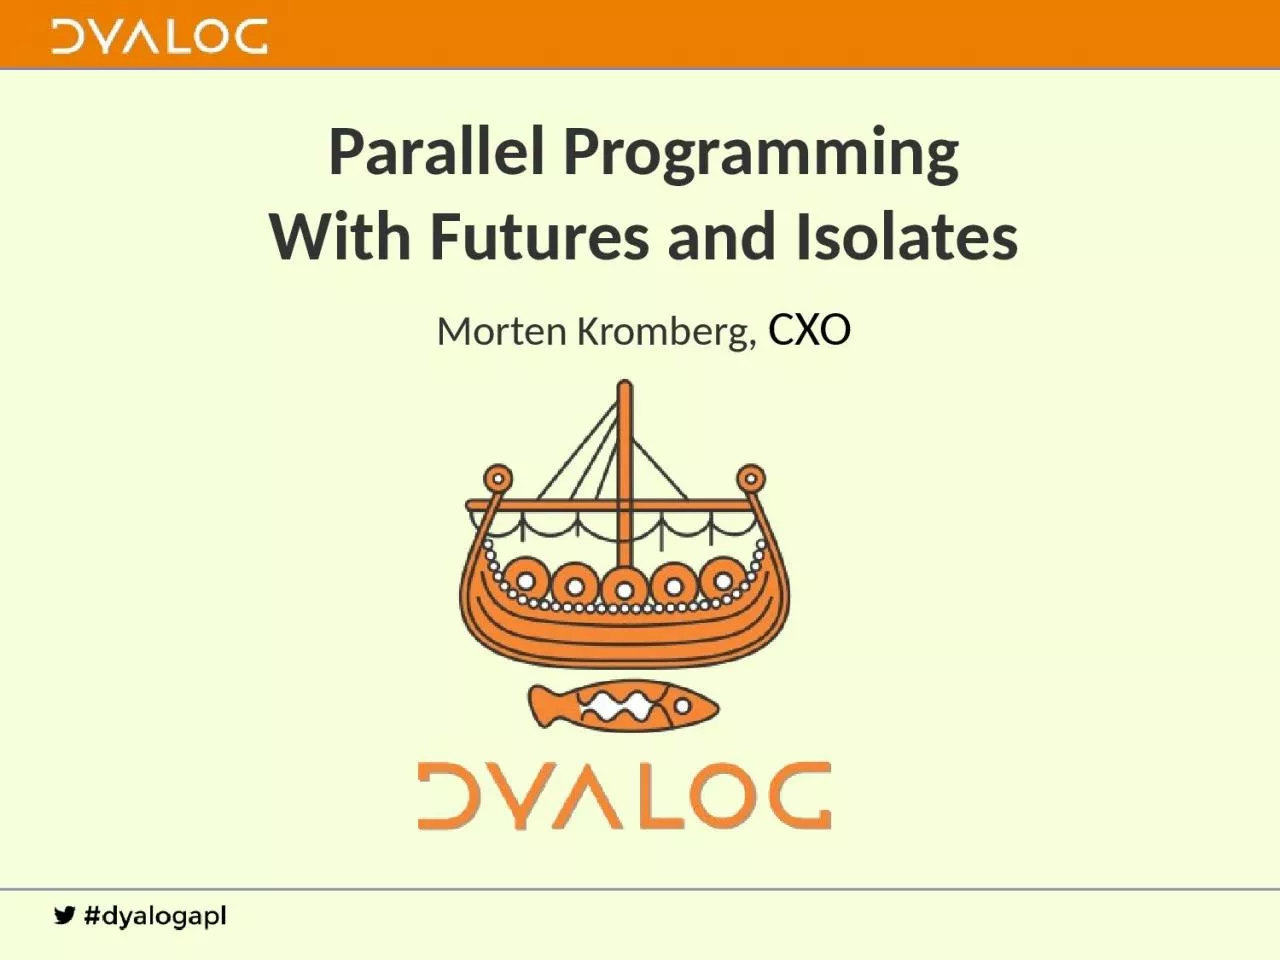 Parallel Programming With Futures and Isolates